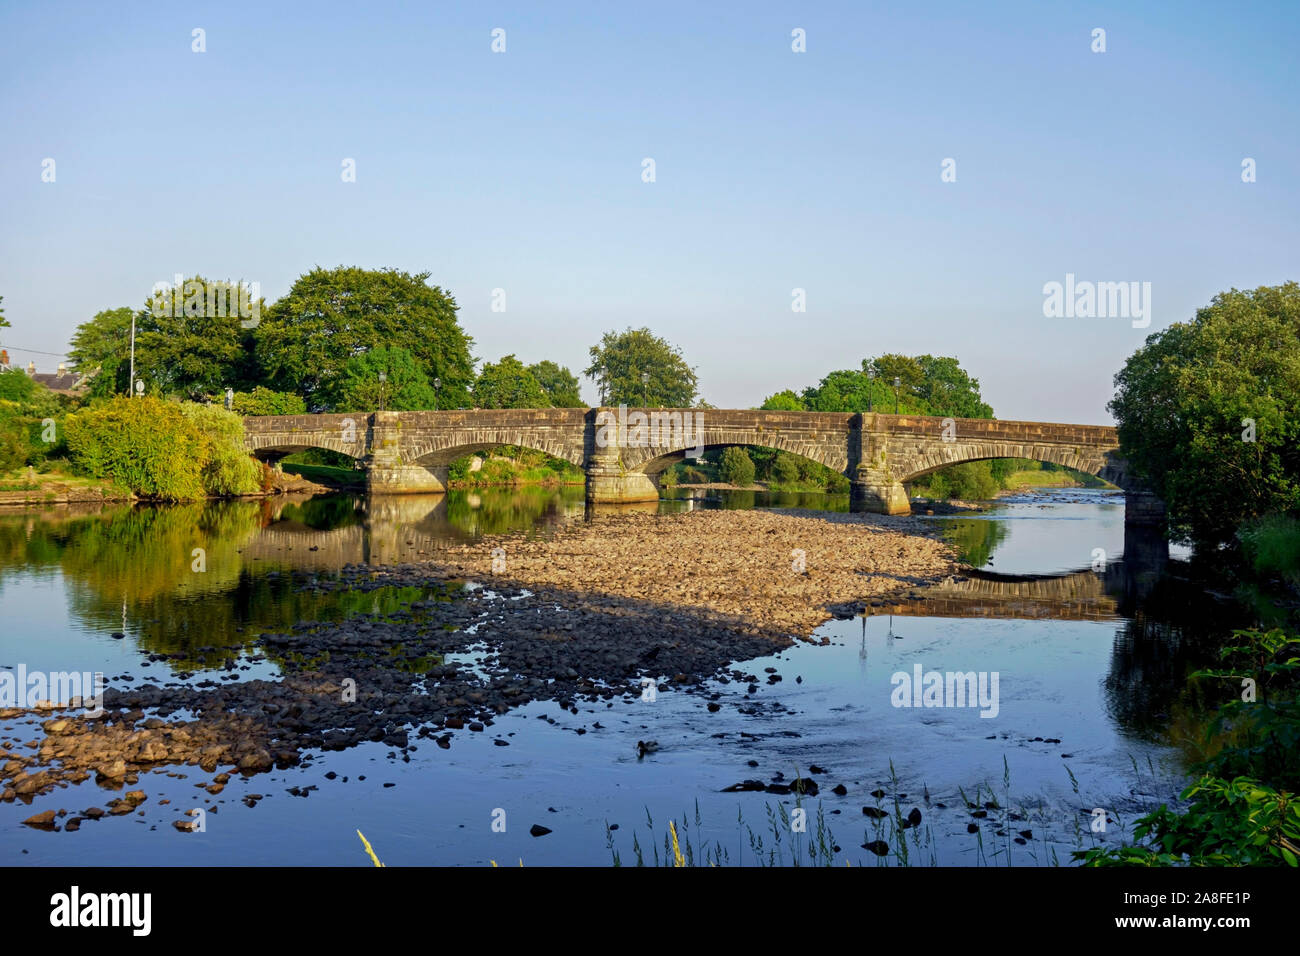 The north side of the bridge over the River Cree at Newton Stewart, Wigtownshire, Dumfries and Galloway, looking towards the village of Minnigaff. Stock Photo